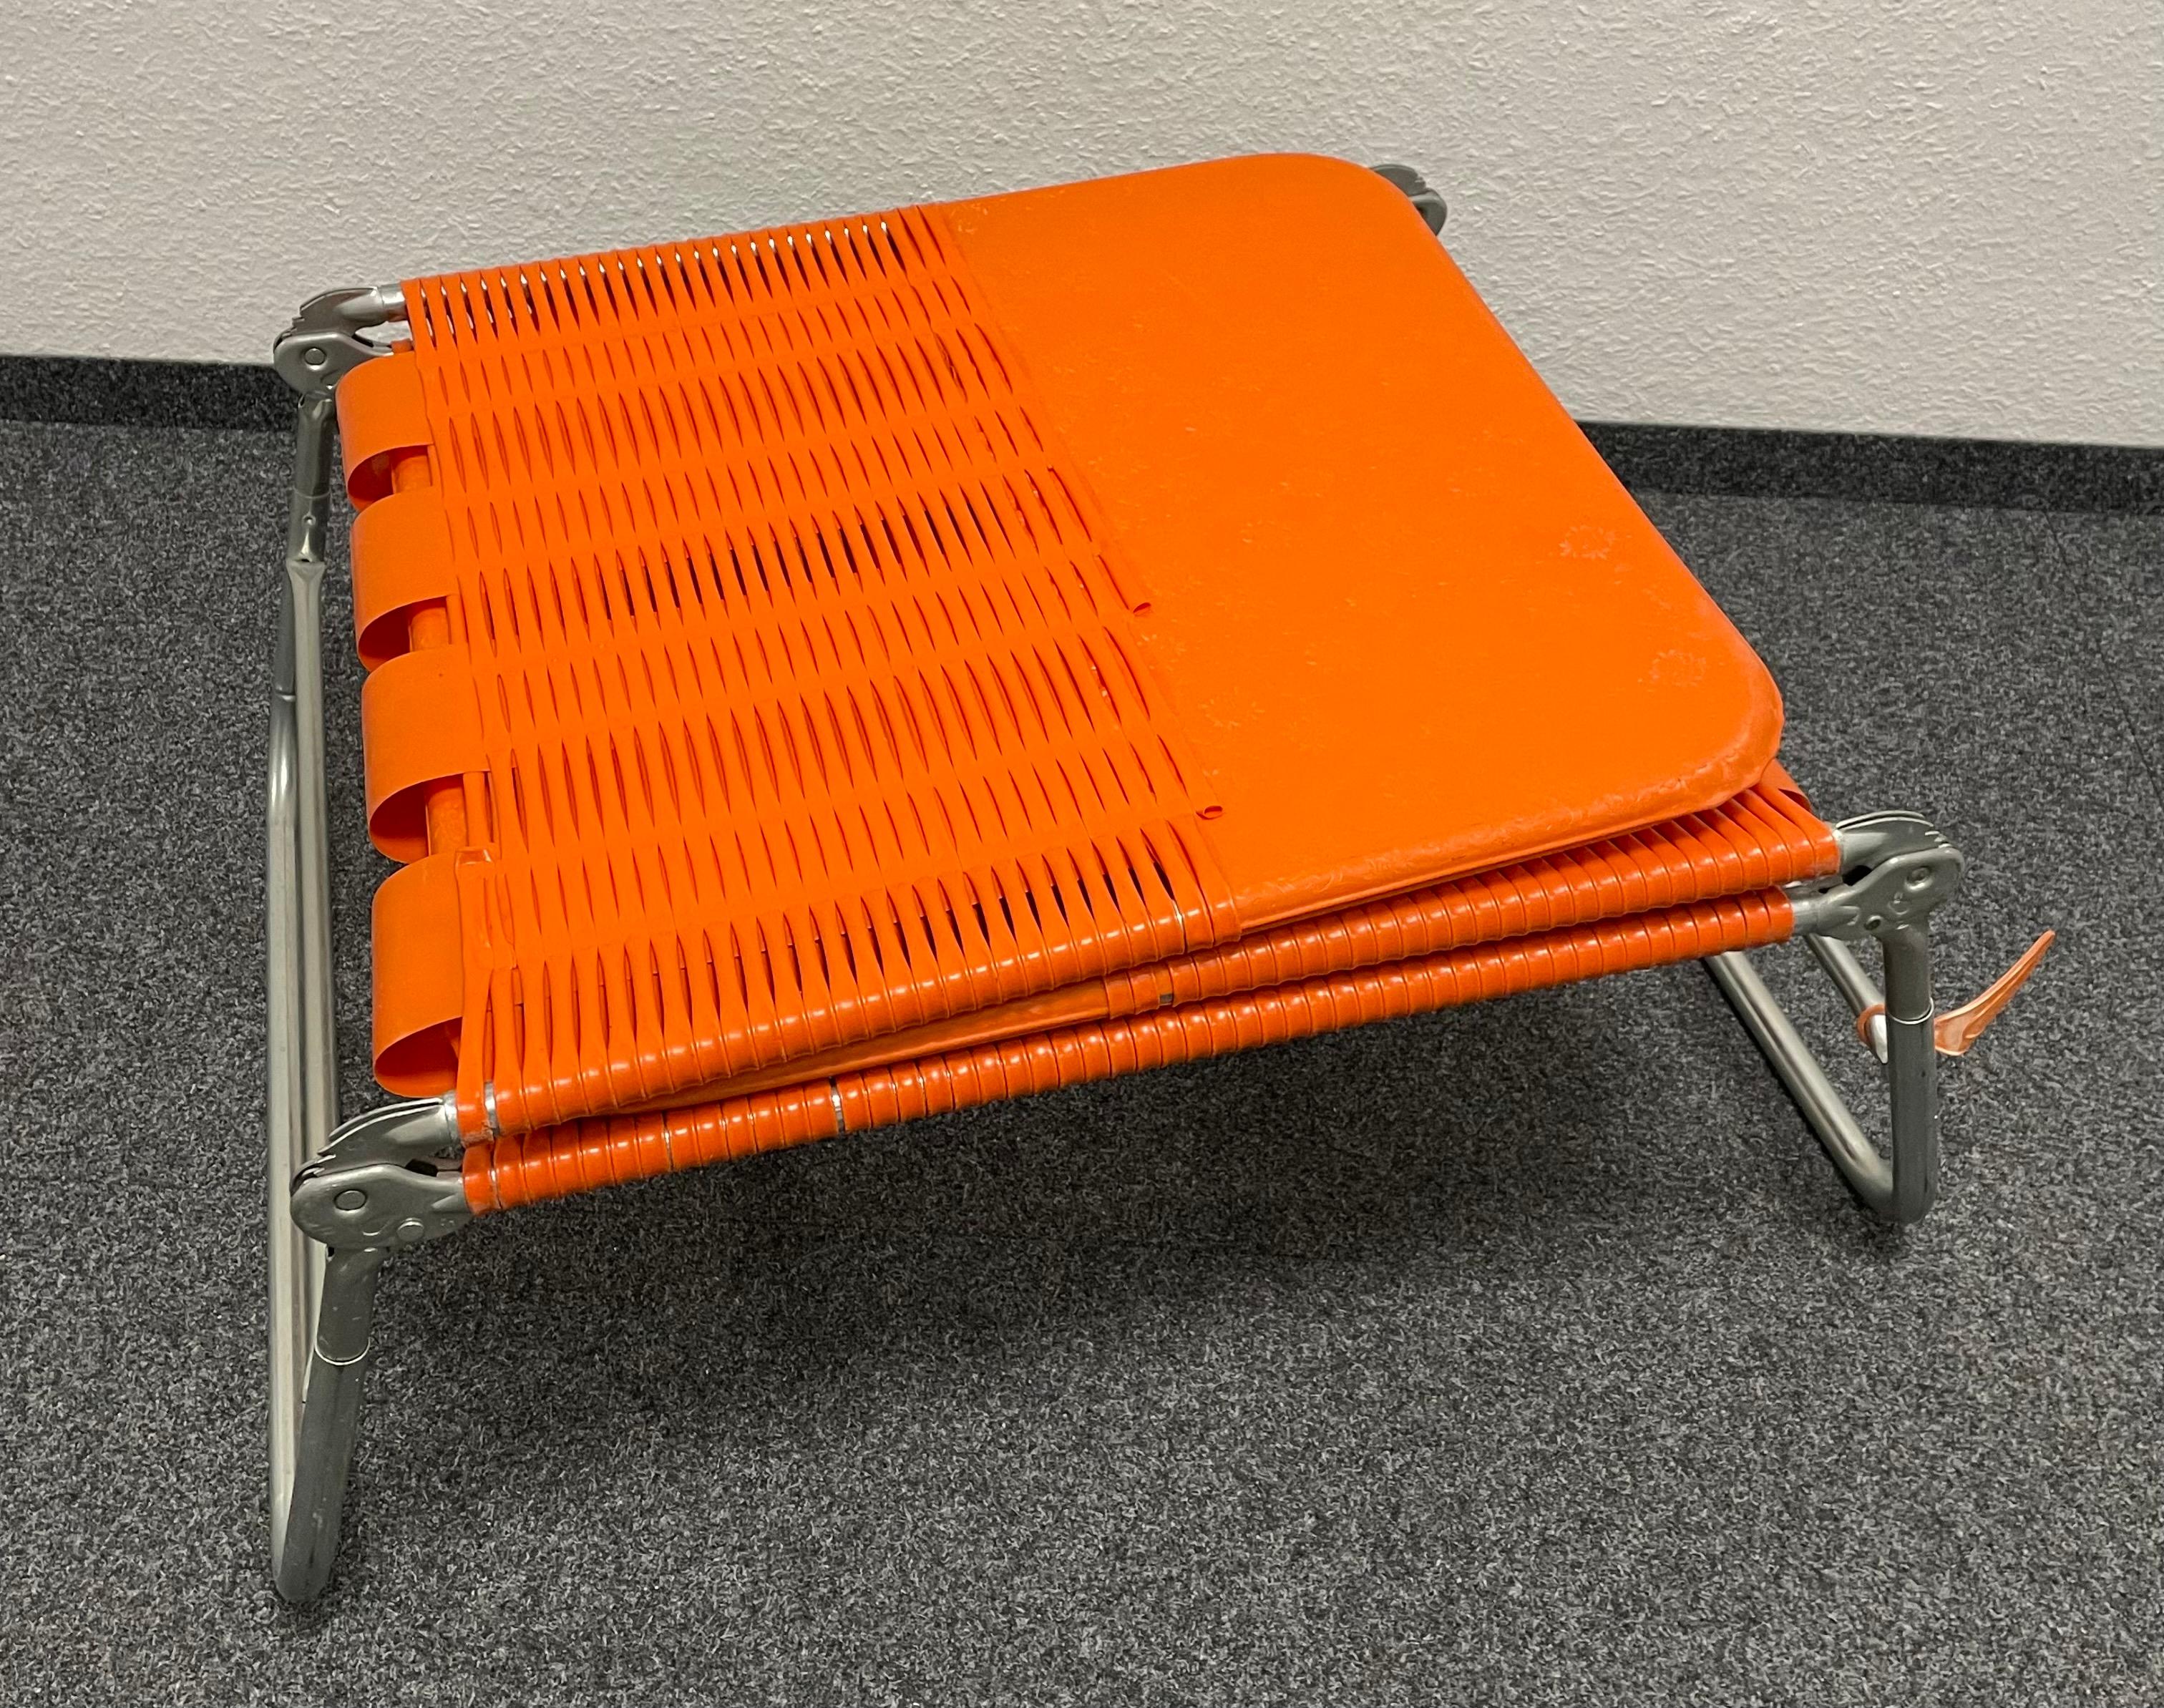 Aluminum Midcentury Folding Deck Chair, Pool Patio Lounger by Kurz, Germany, 1970s